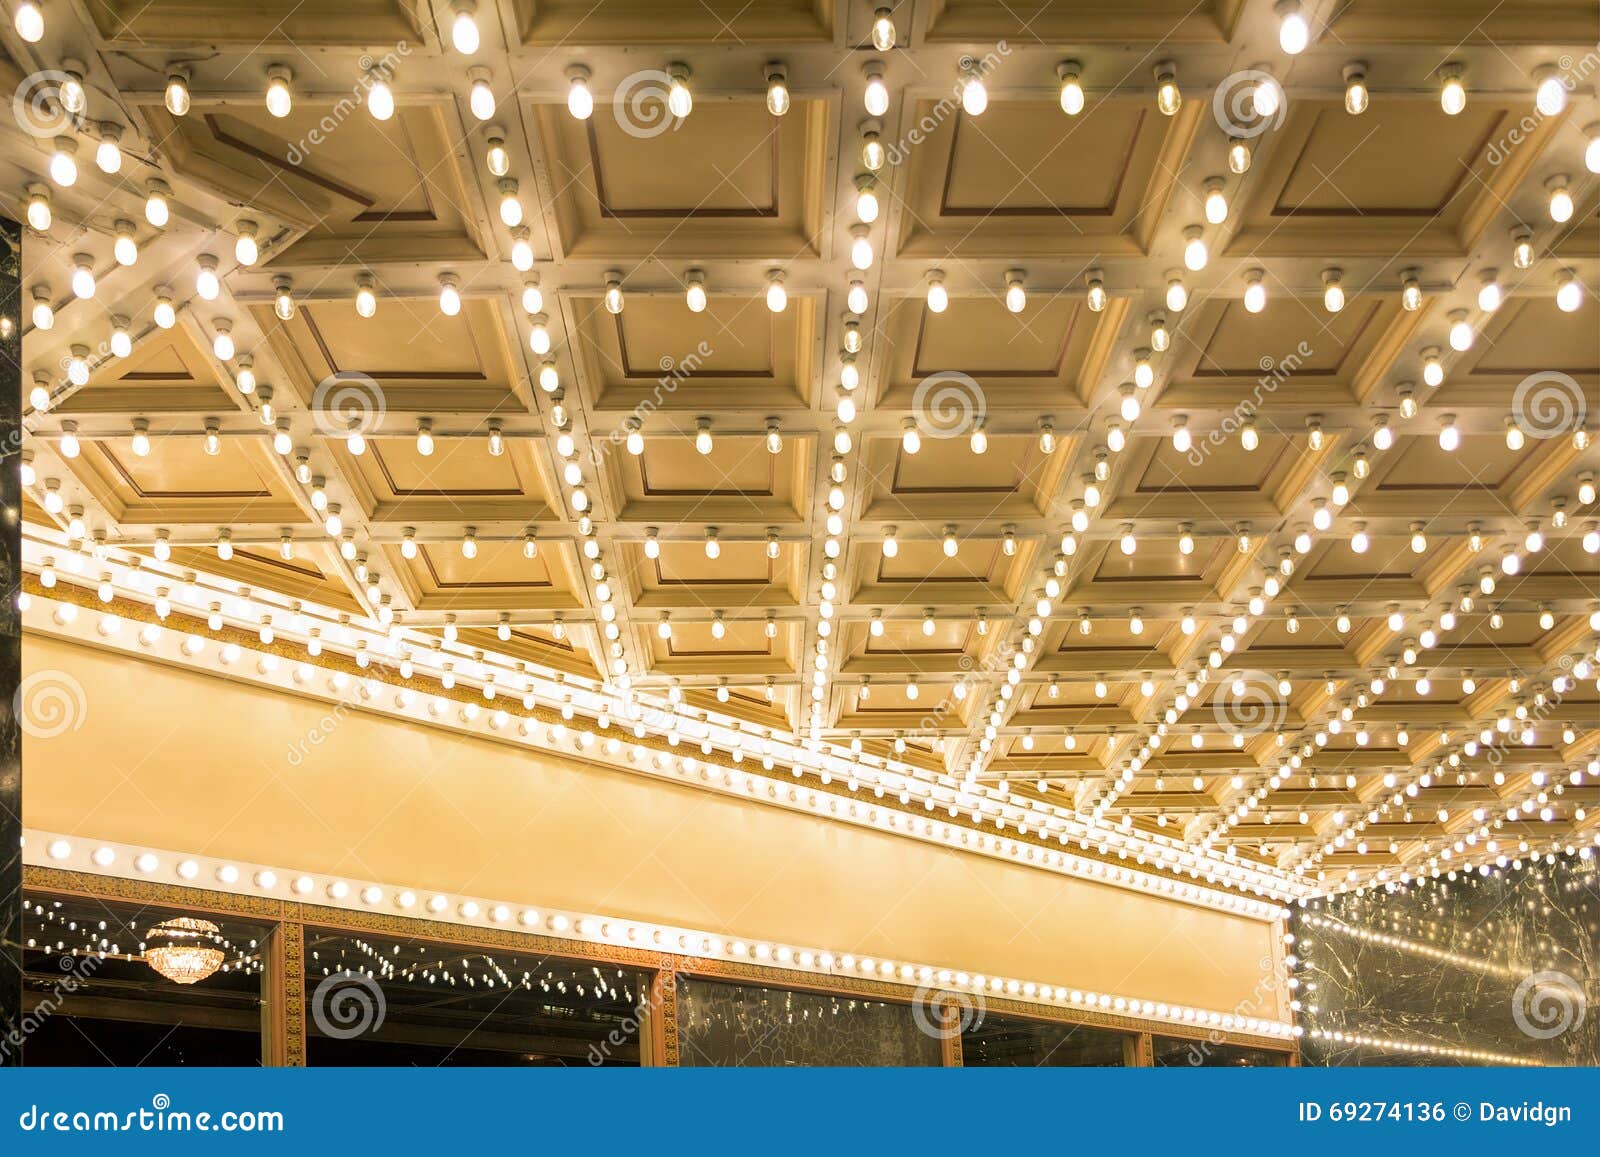 Broadway Theater Marquee Lights Stock Photo Image Of Ceiling